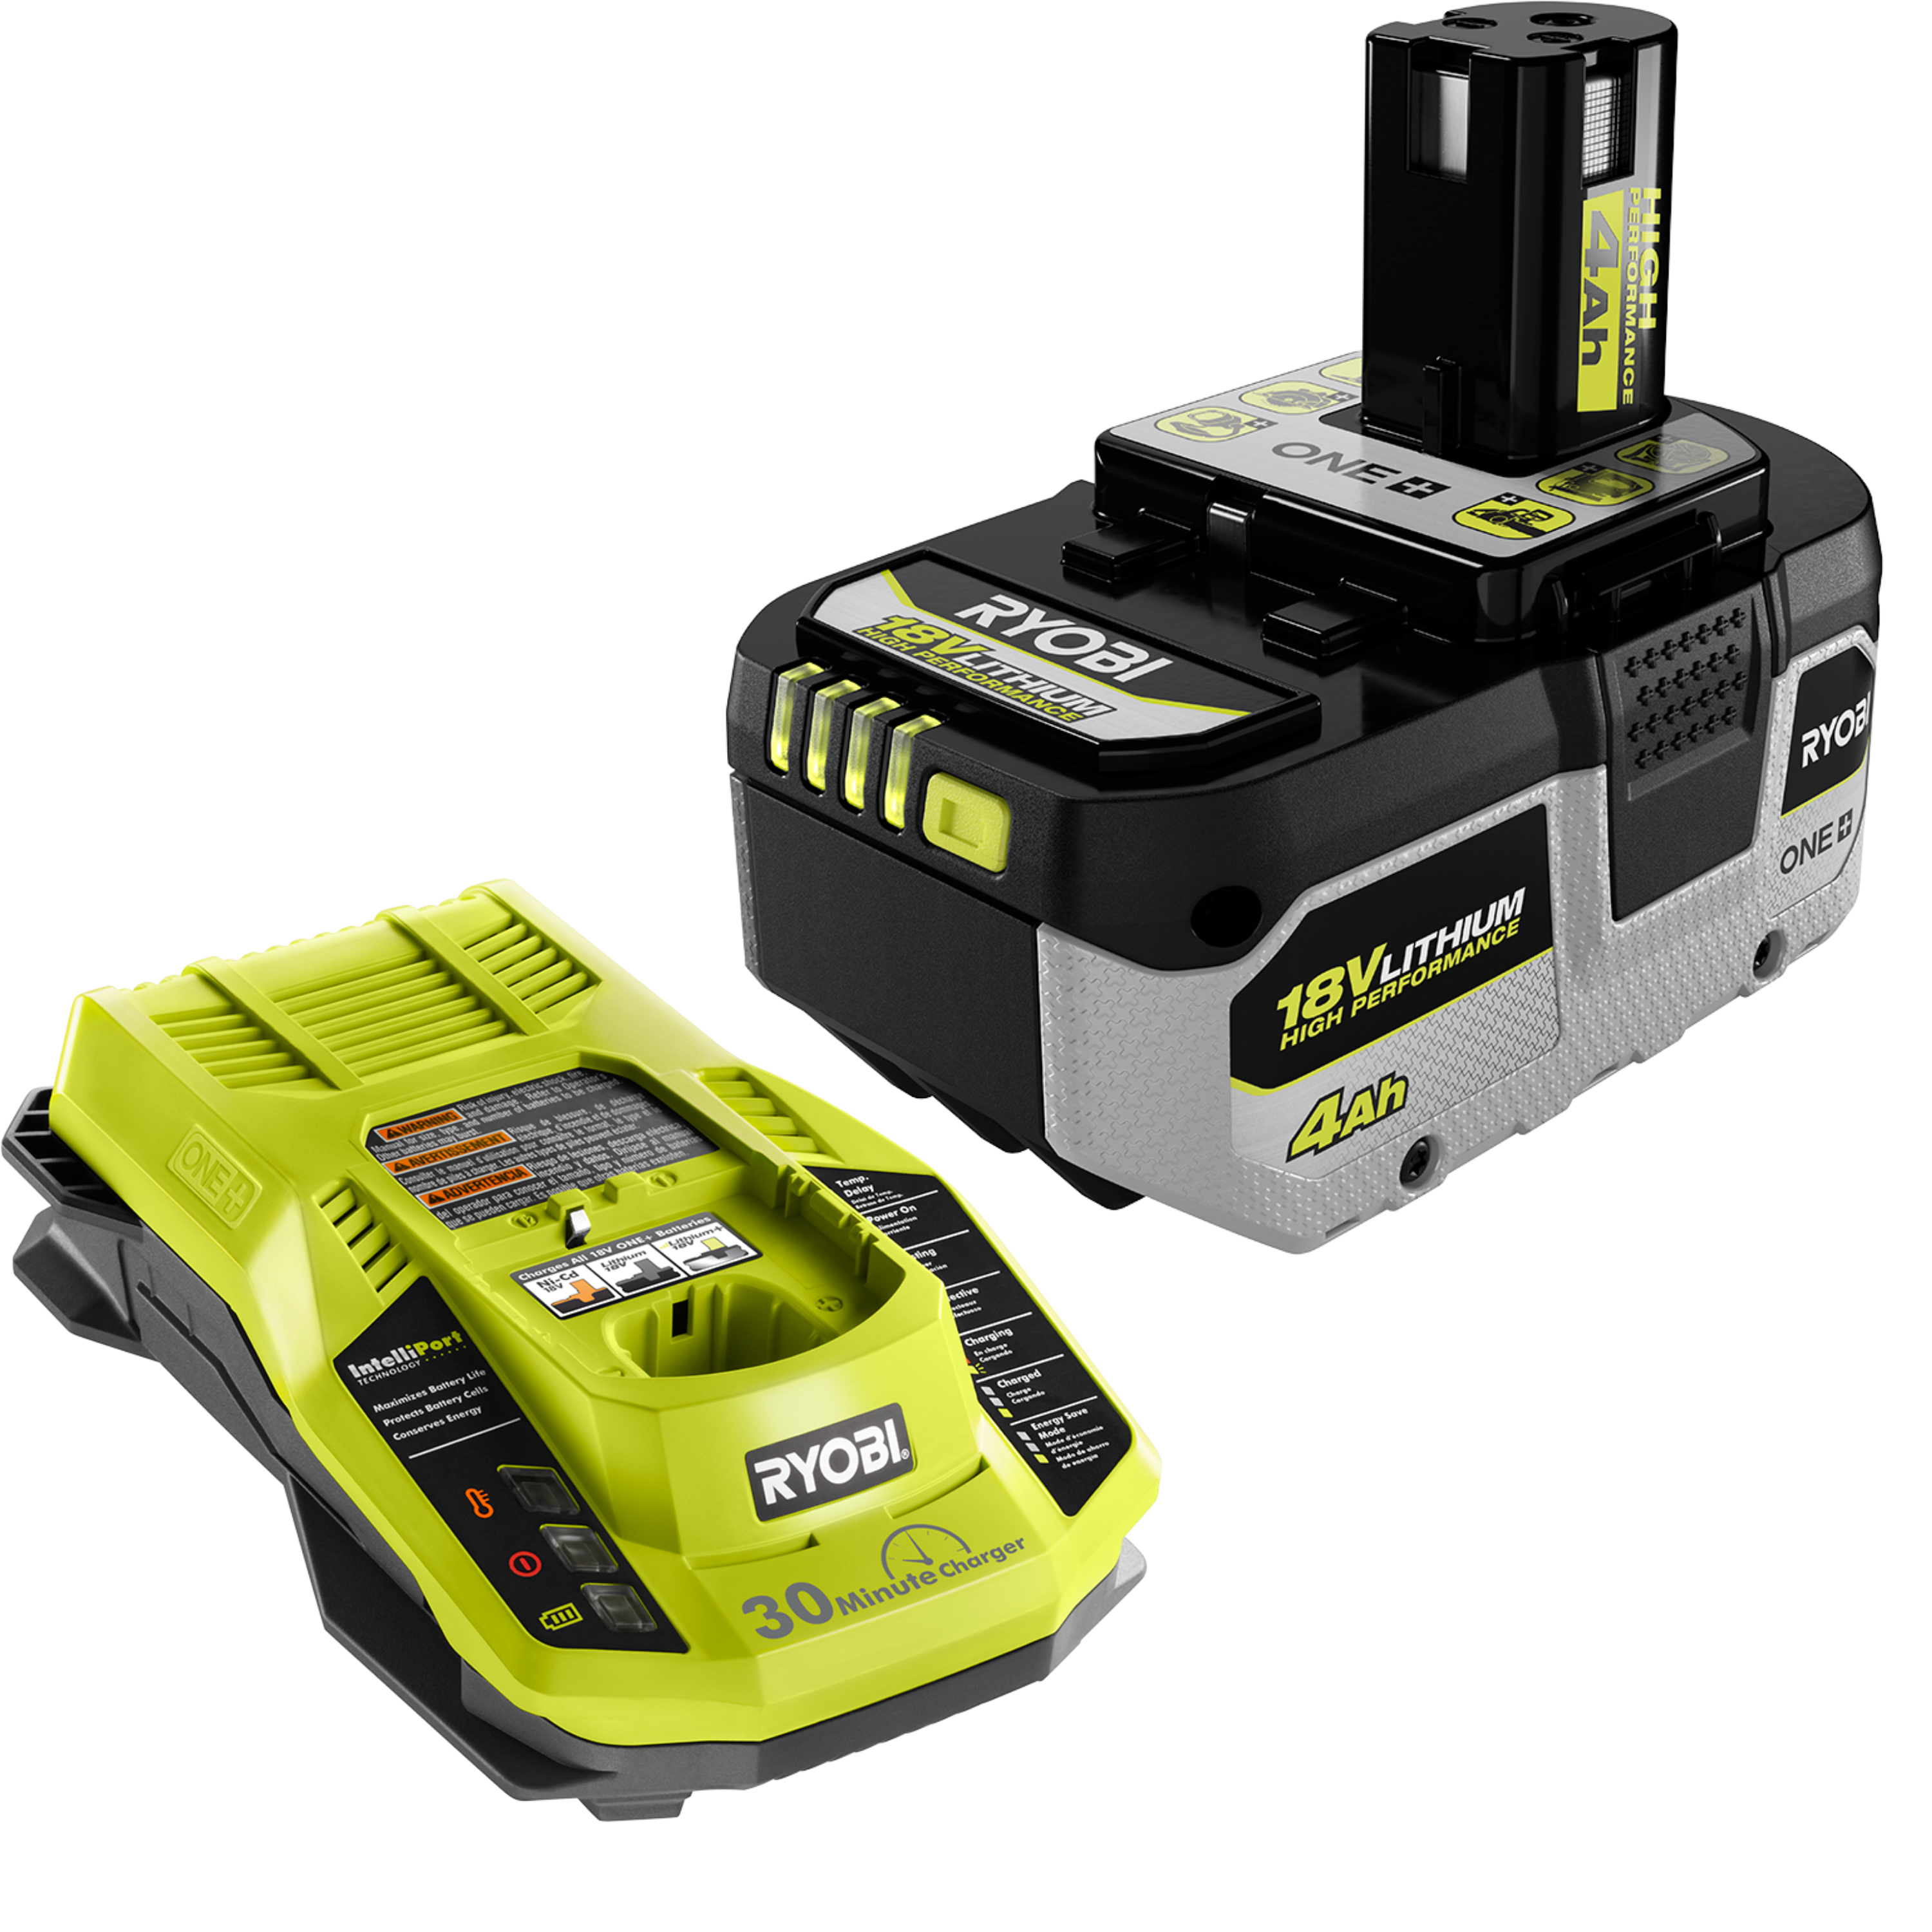  New Version 18V 9.0 Ah Battery and Charger Combo Kit